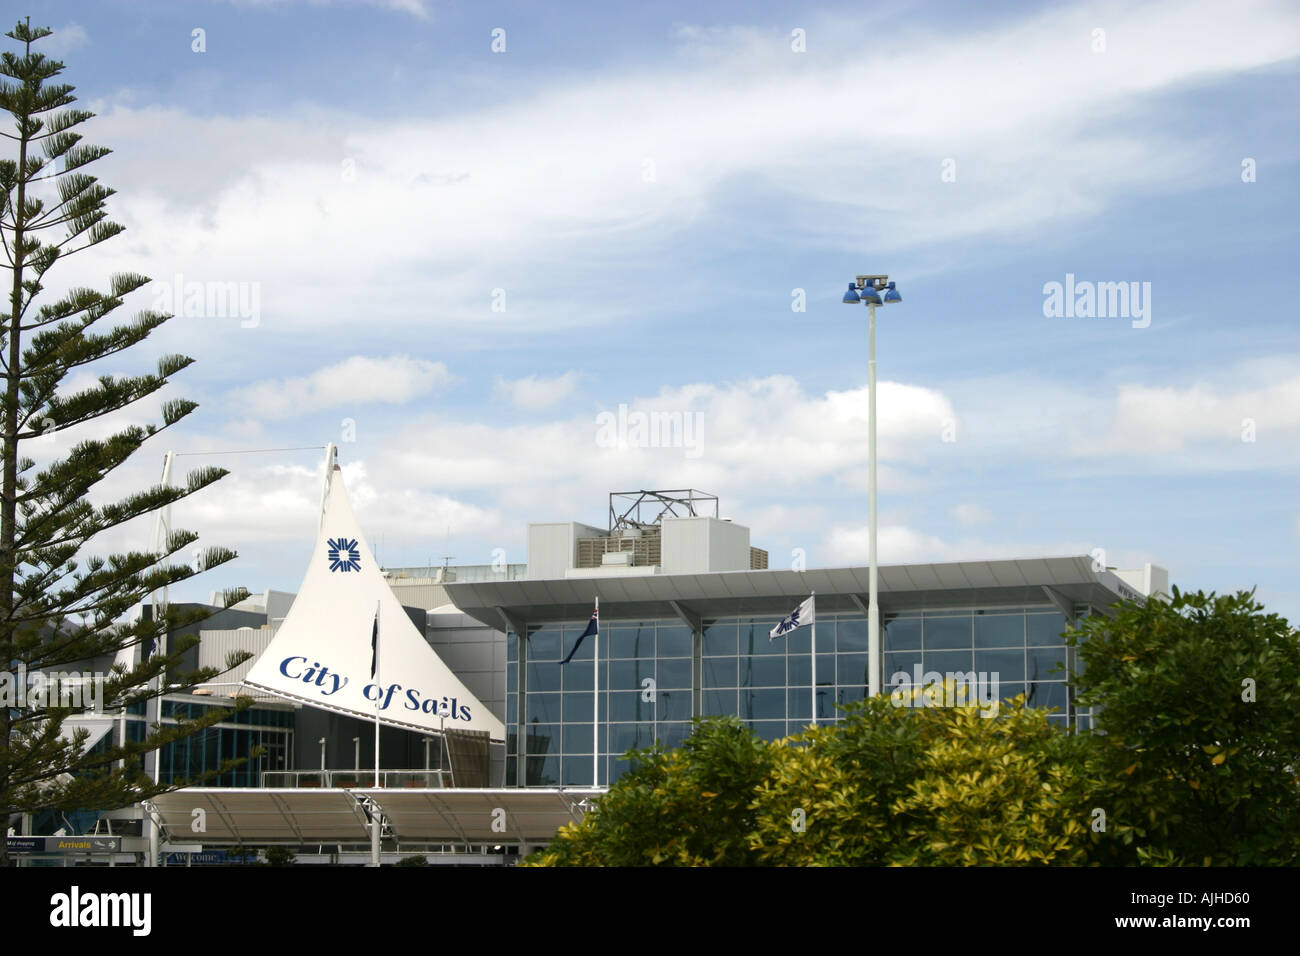 Auckland City of Sails Airport North Island New Zealand Stock Photo